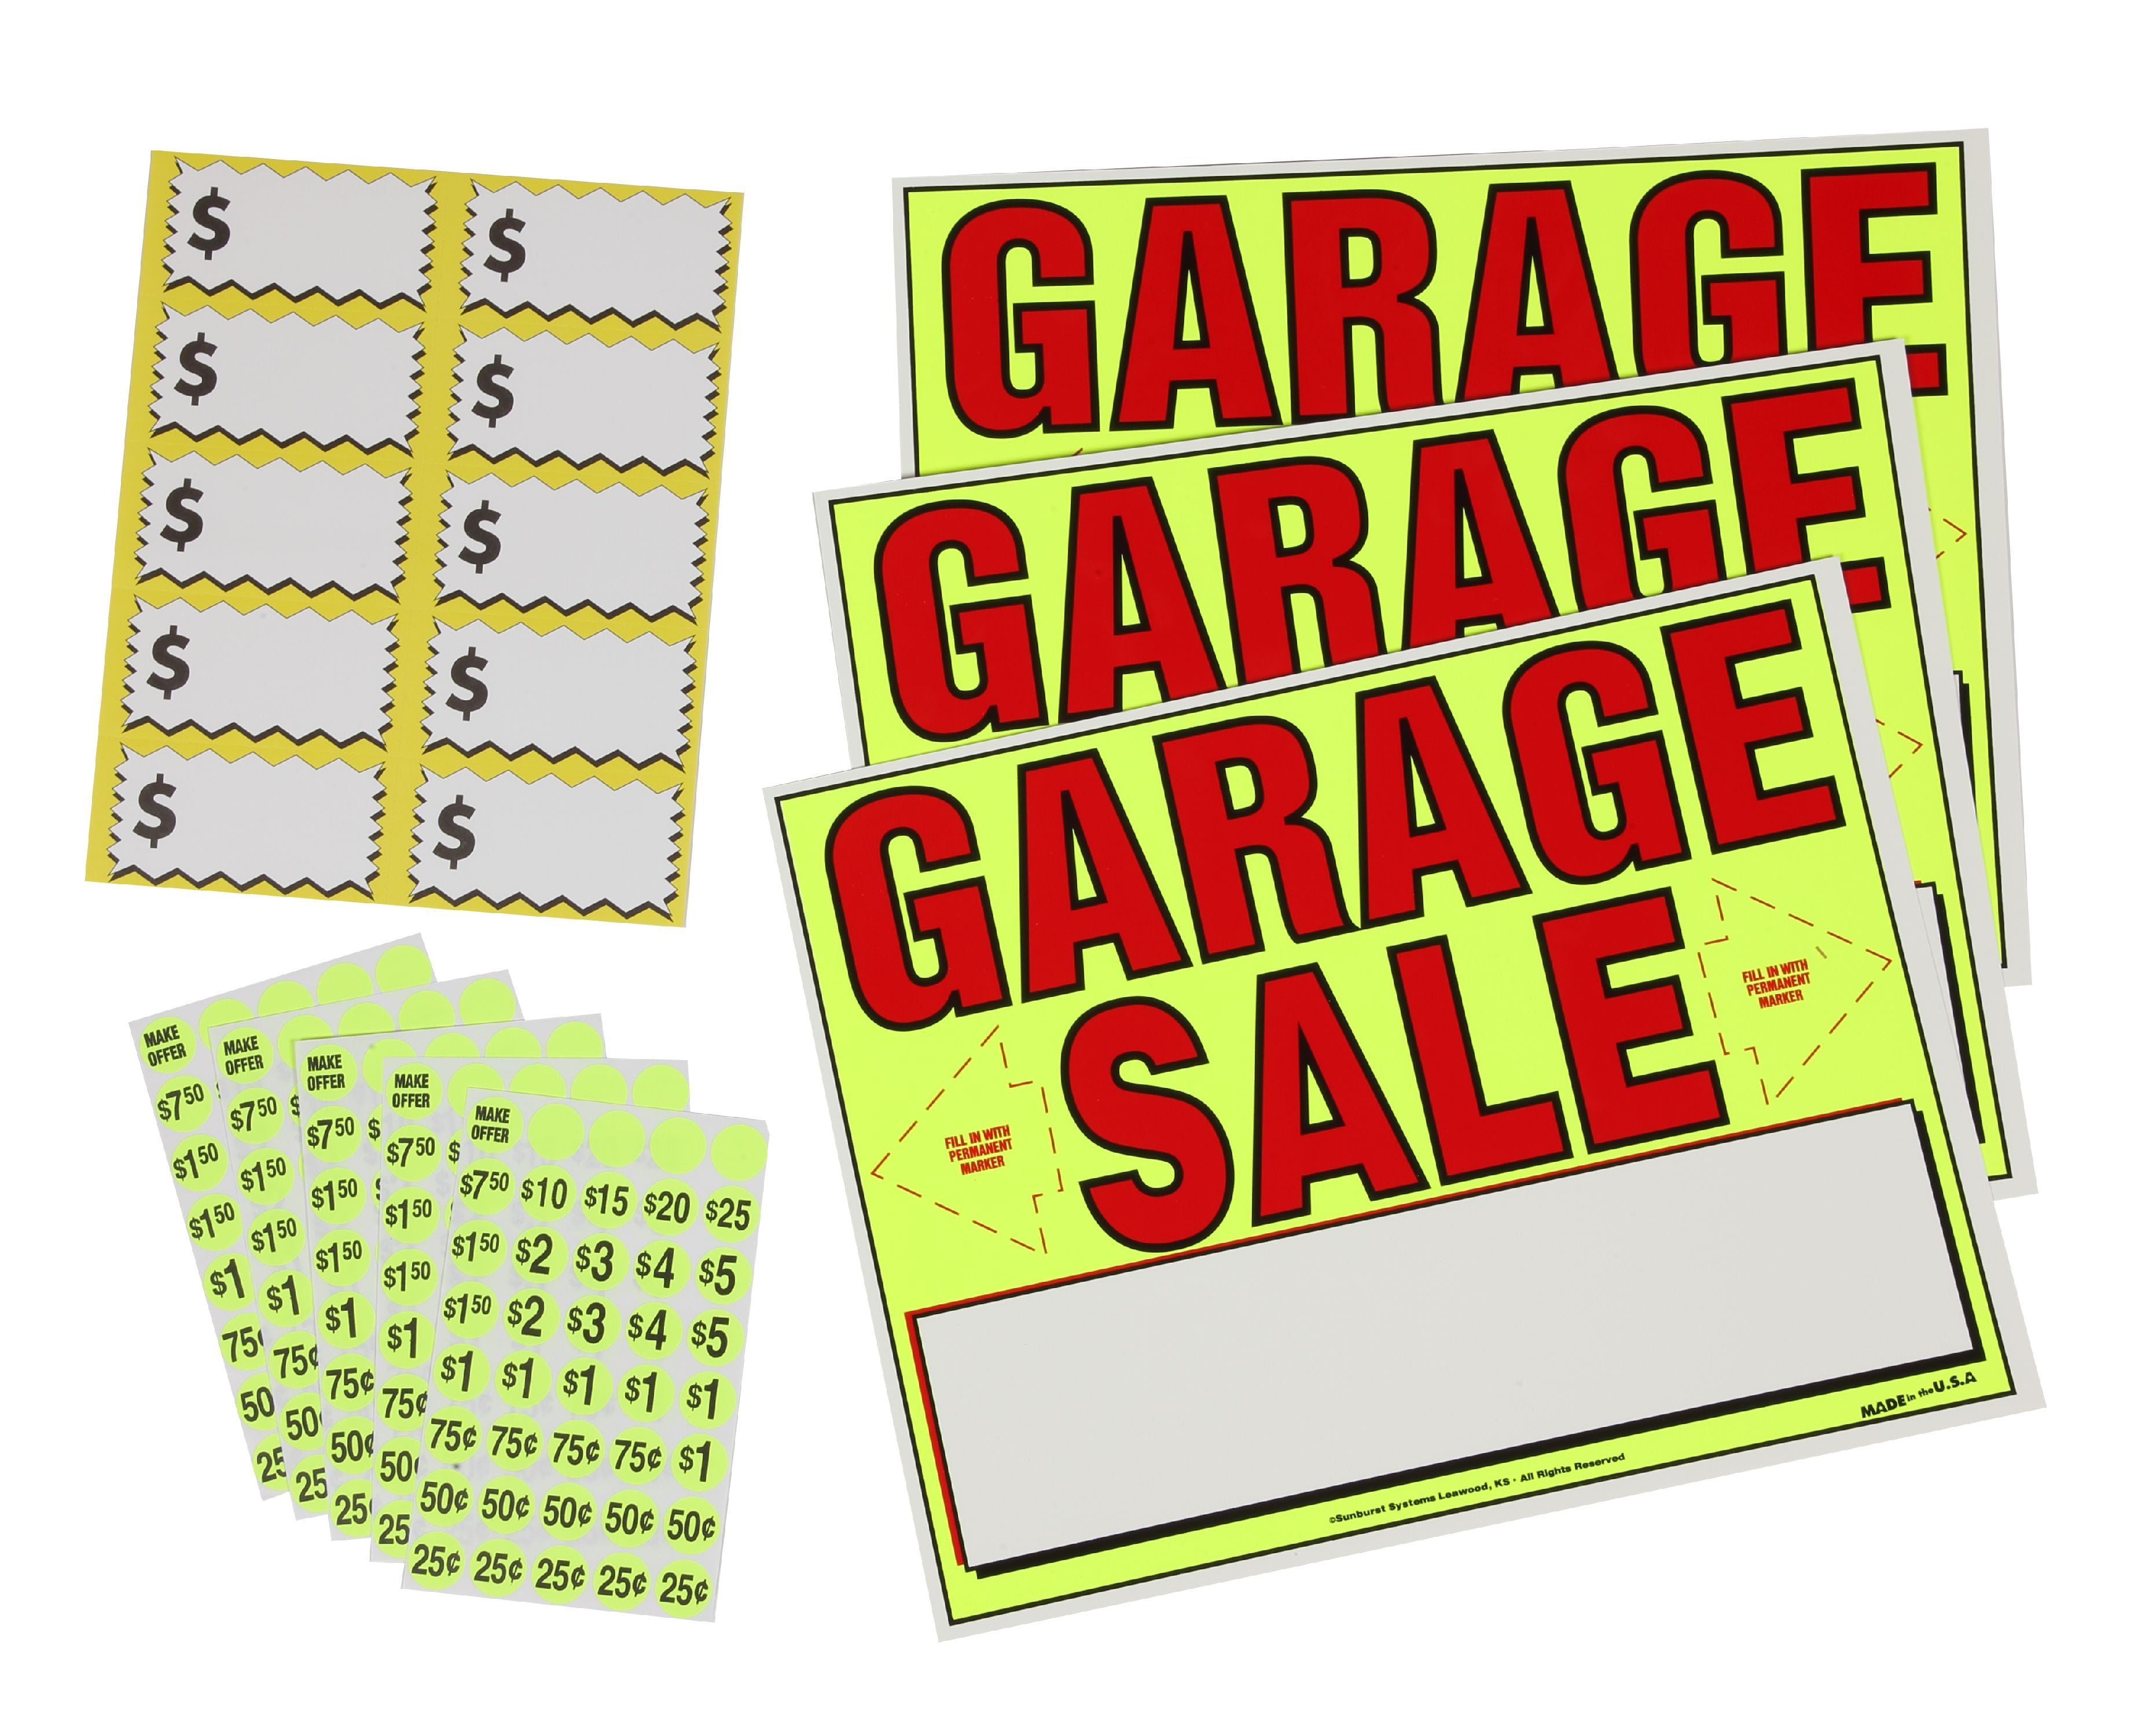 100 PAPER STRING MARKING TAGS 3-1/4" x 1-15/16" GARAGE SALE SHOP JEWELRY HOME 